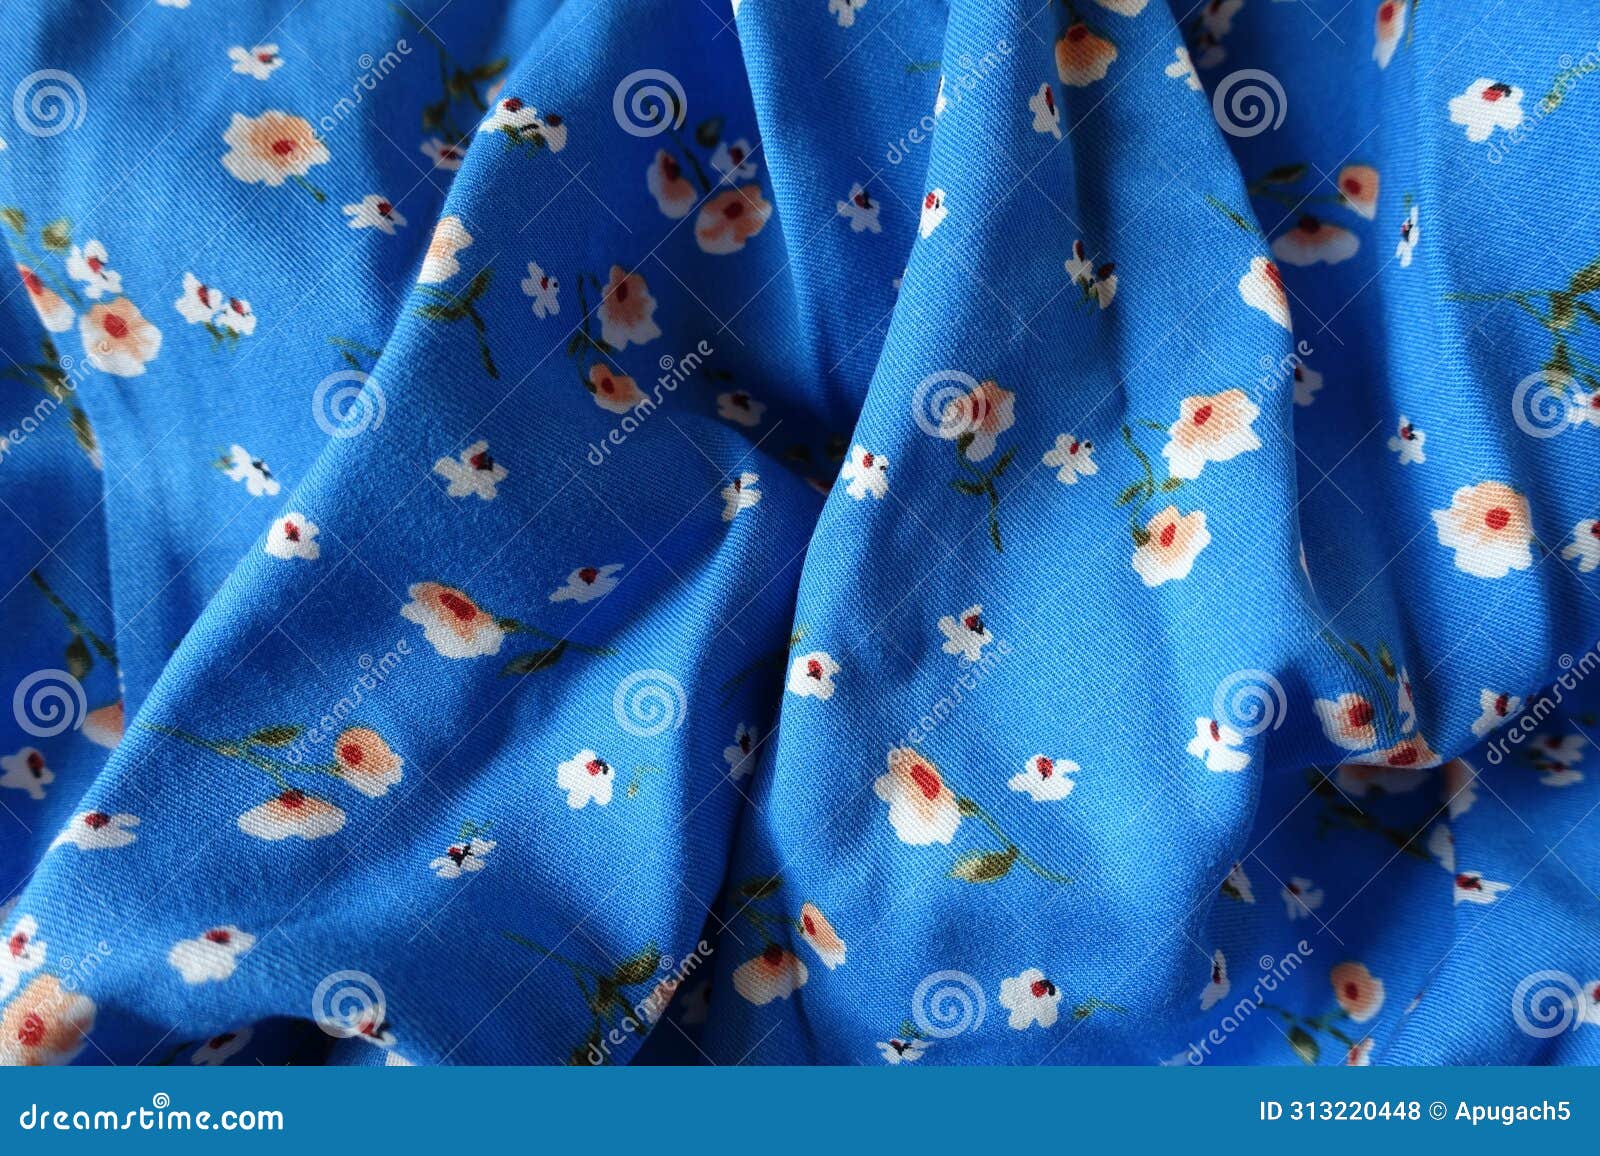 jammed vibrant blue cotton fabric with old-fashioned floral print